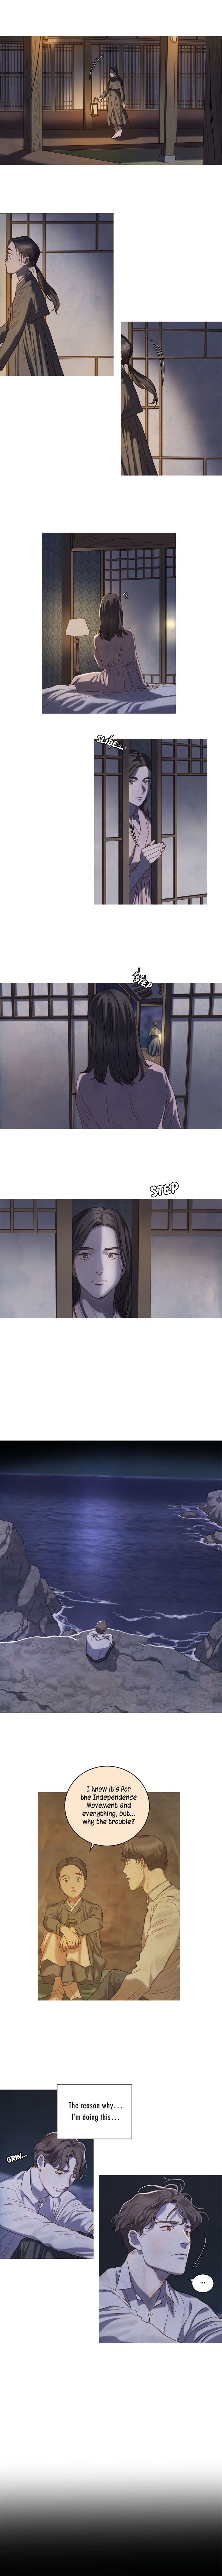 Gorae Byul – The Gyeongseong Mermaid Chapter 4 - Page 8